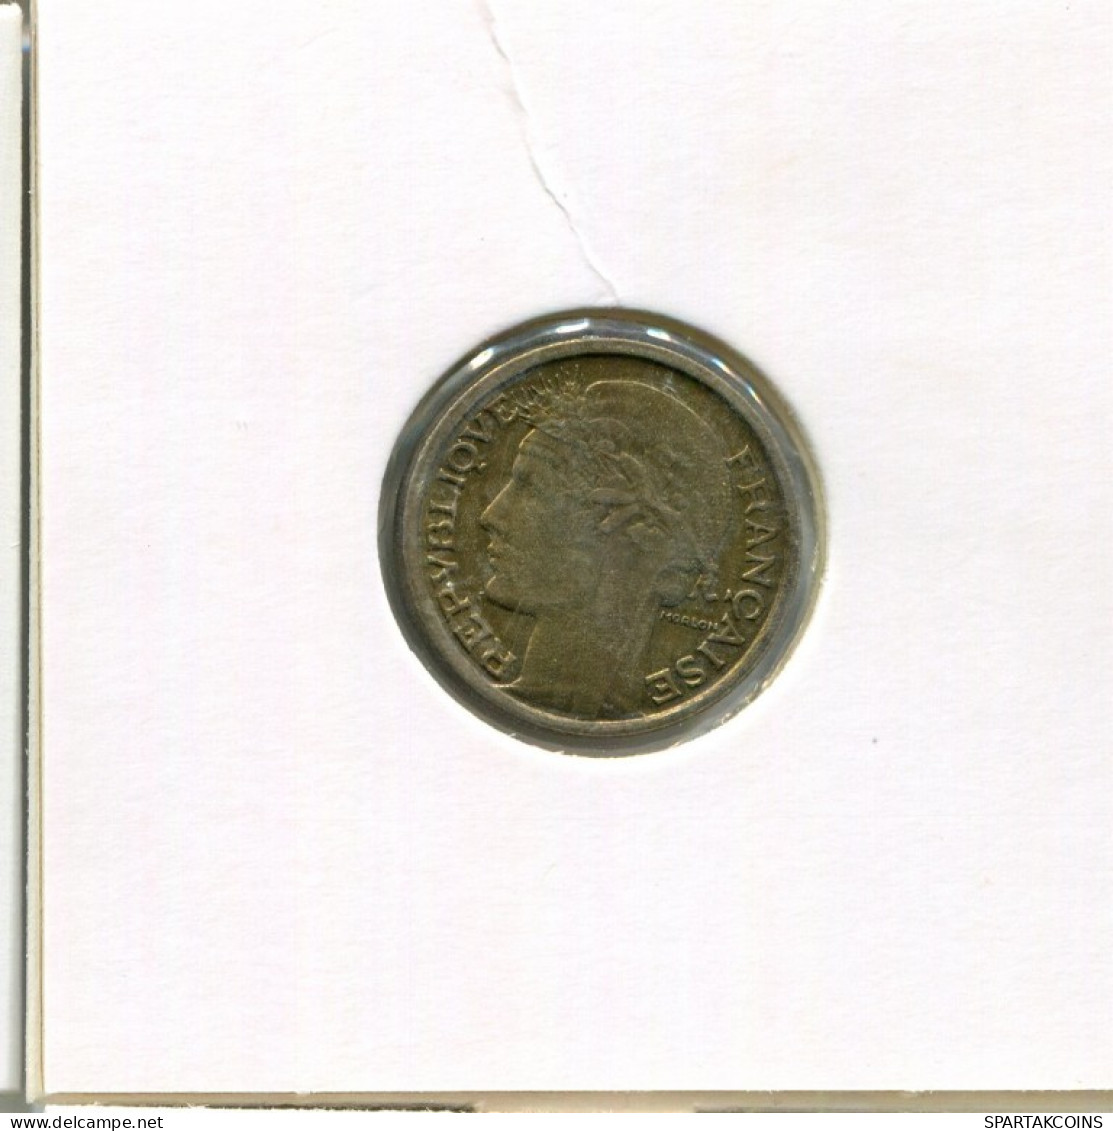 50 CENTIMES 1941 FRANCE French Coin #AN218.U.A - 50 Centimes